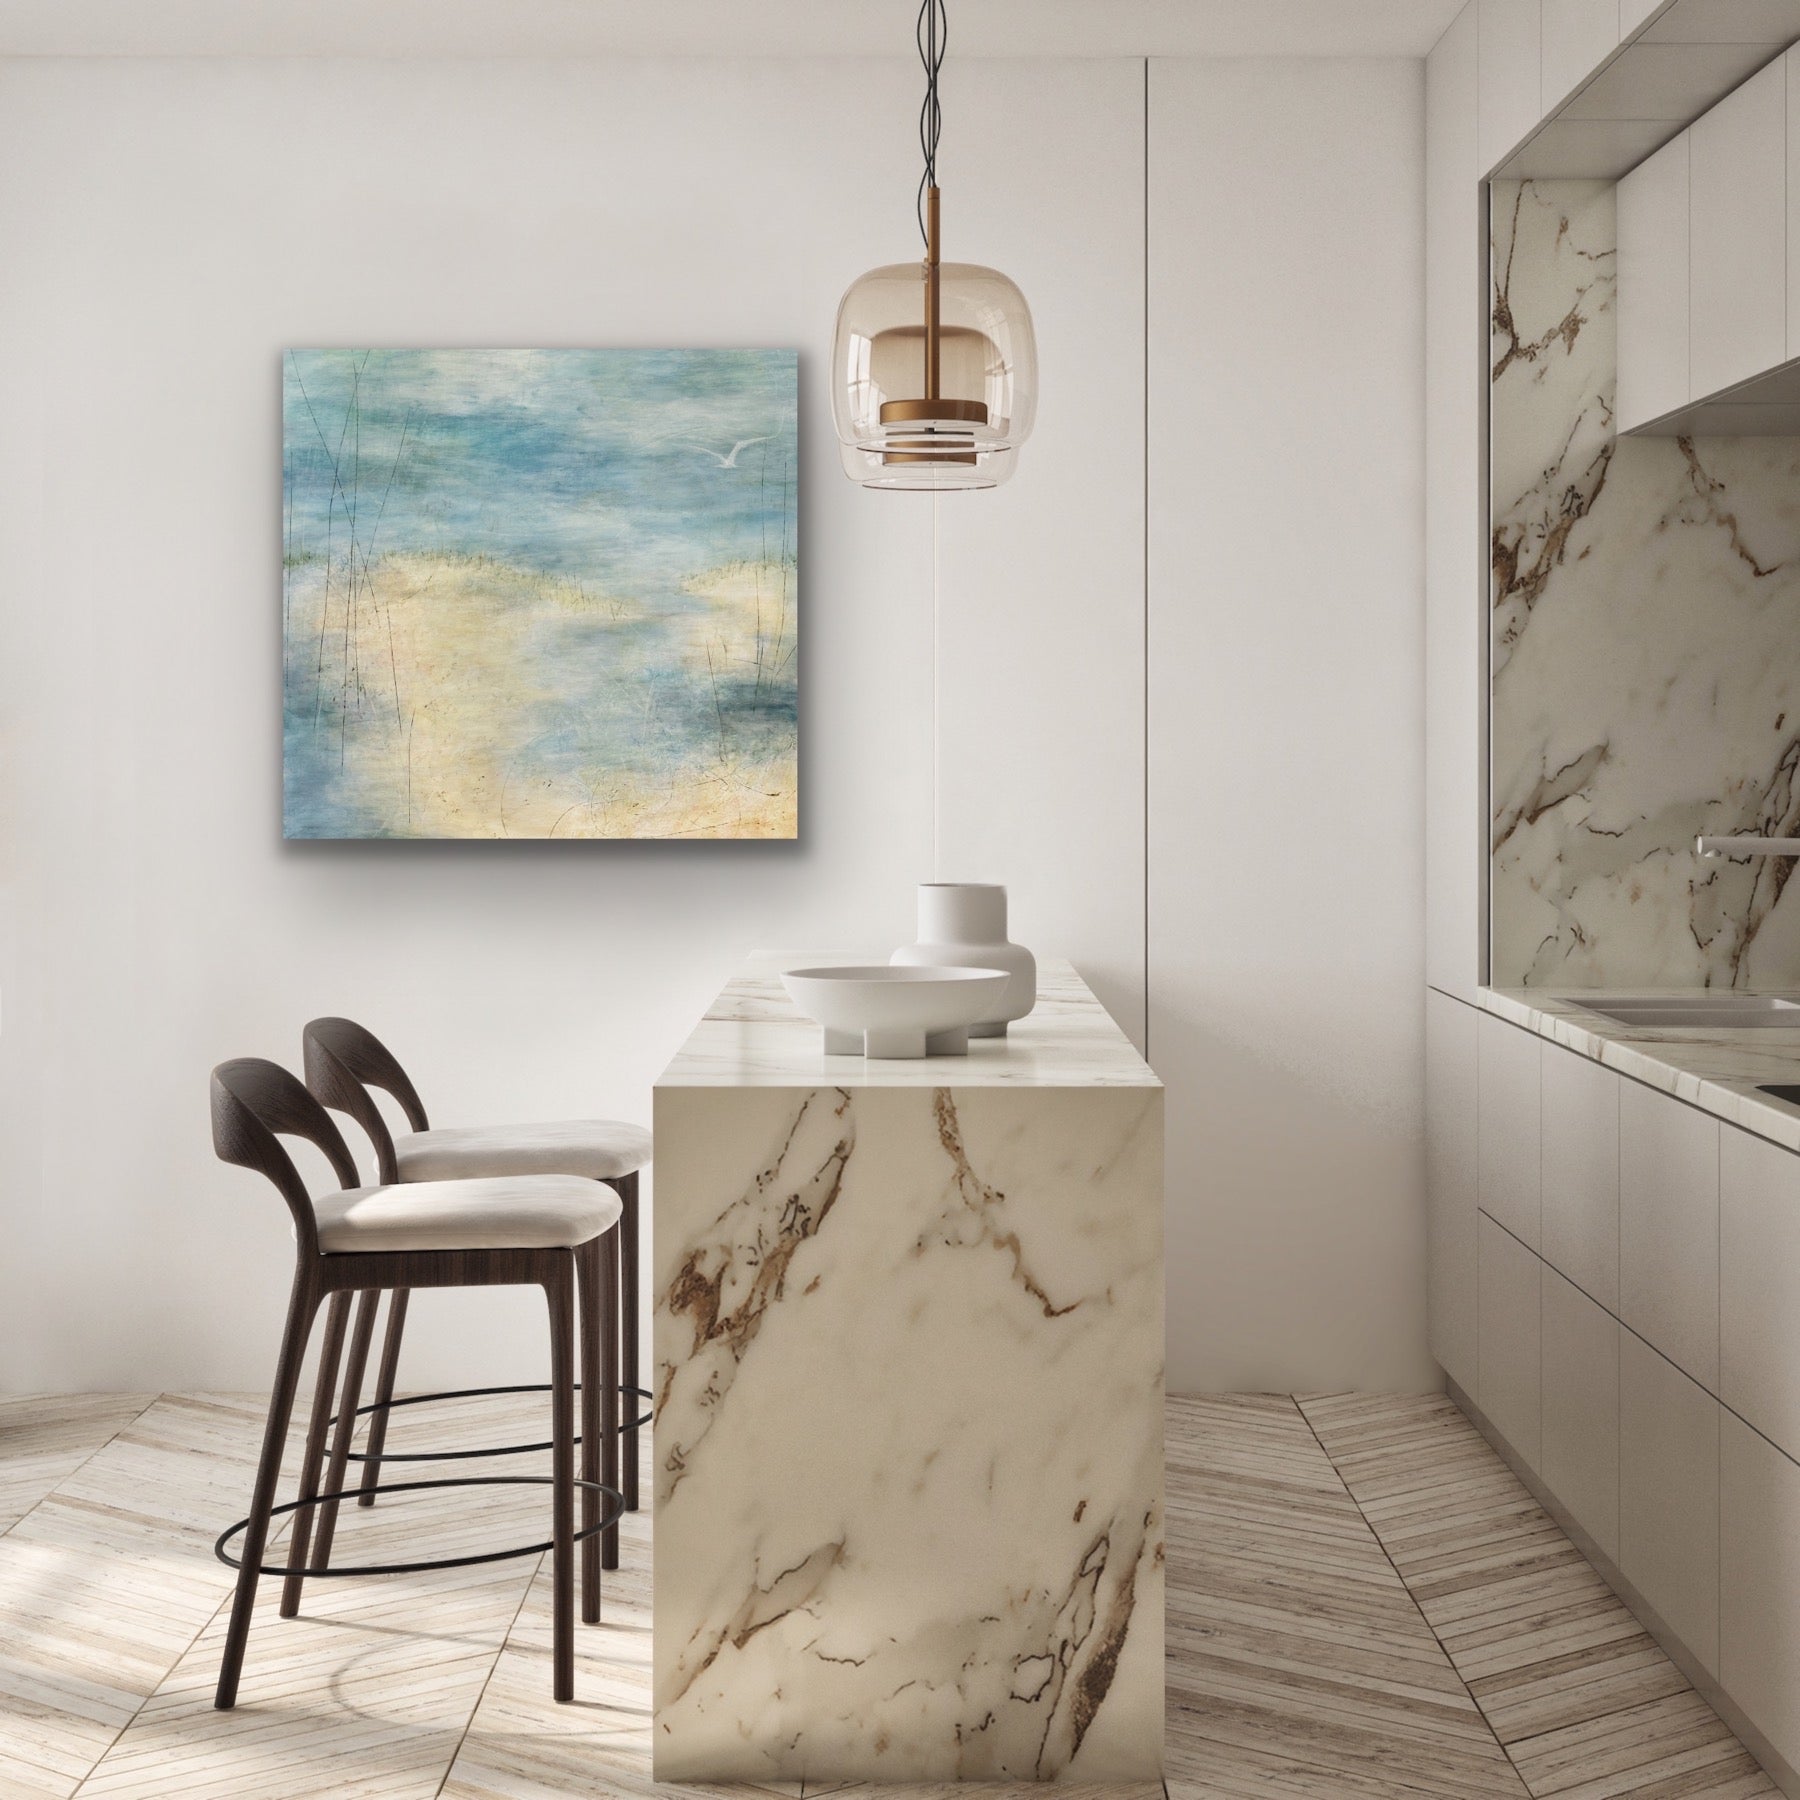 Insitu white marble bar and sink, white walls and an acrylic painting of a soft seascape with water overlapping sand in some areas. There is one lone seagull flying over the water. Painting by Juanita Bellavance, Cumming, GA artist